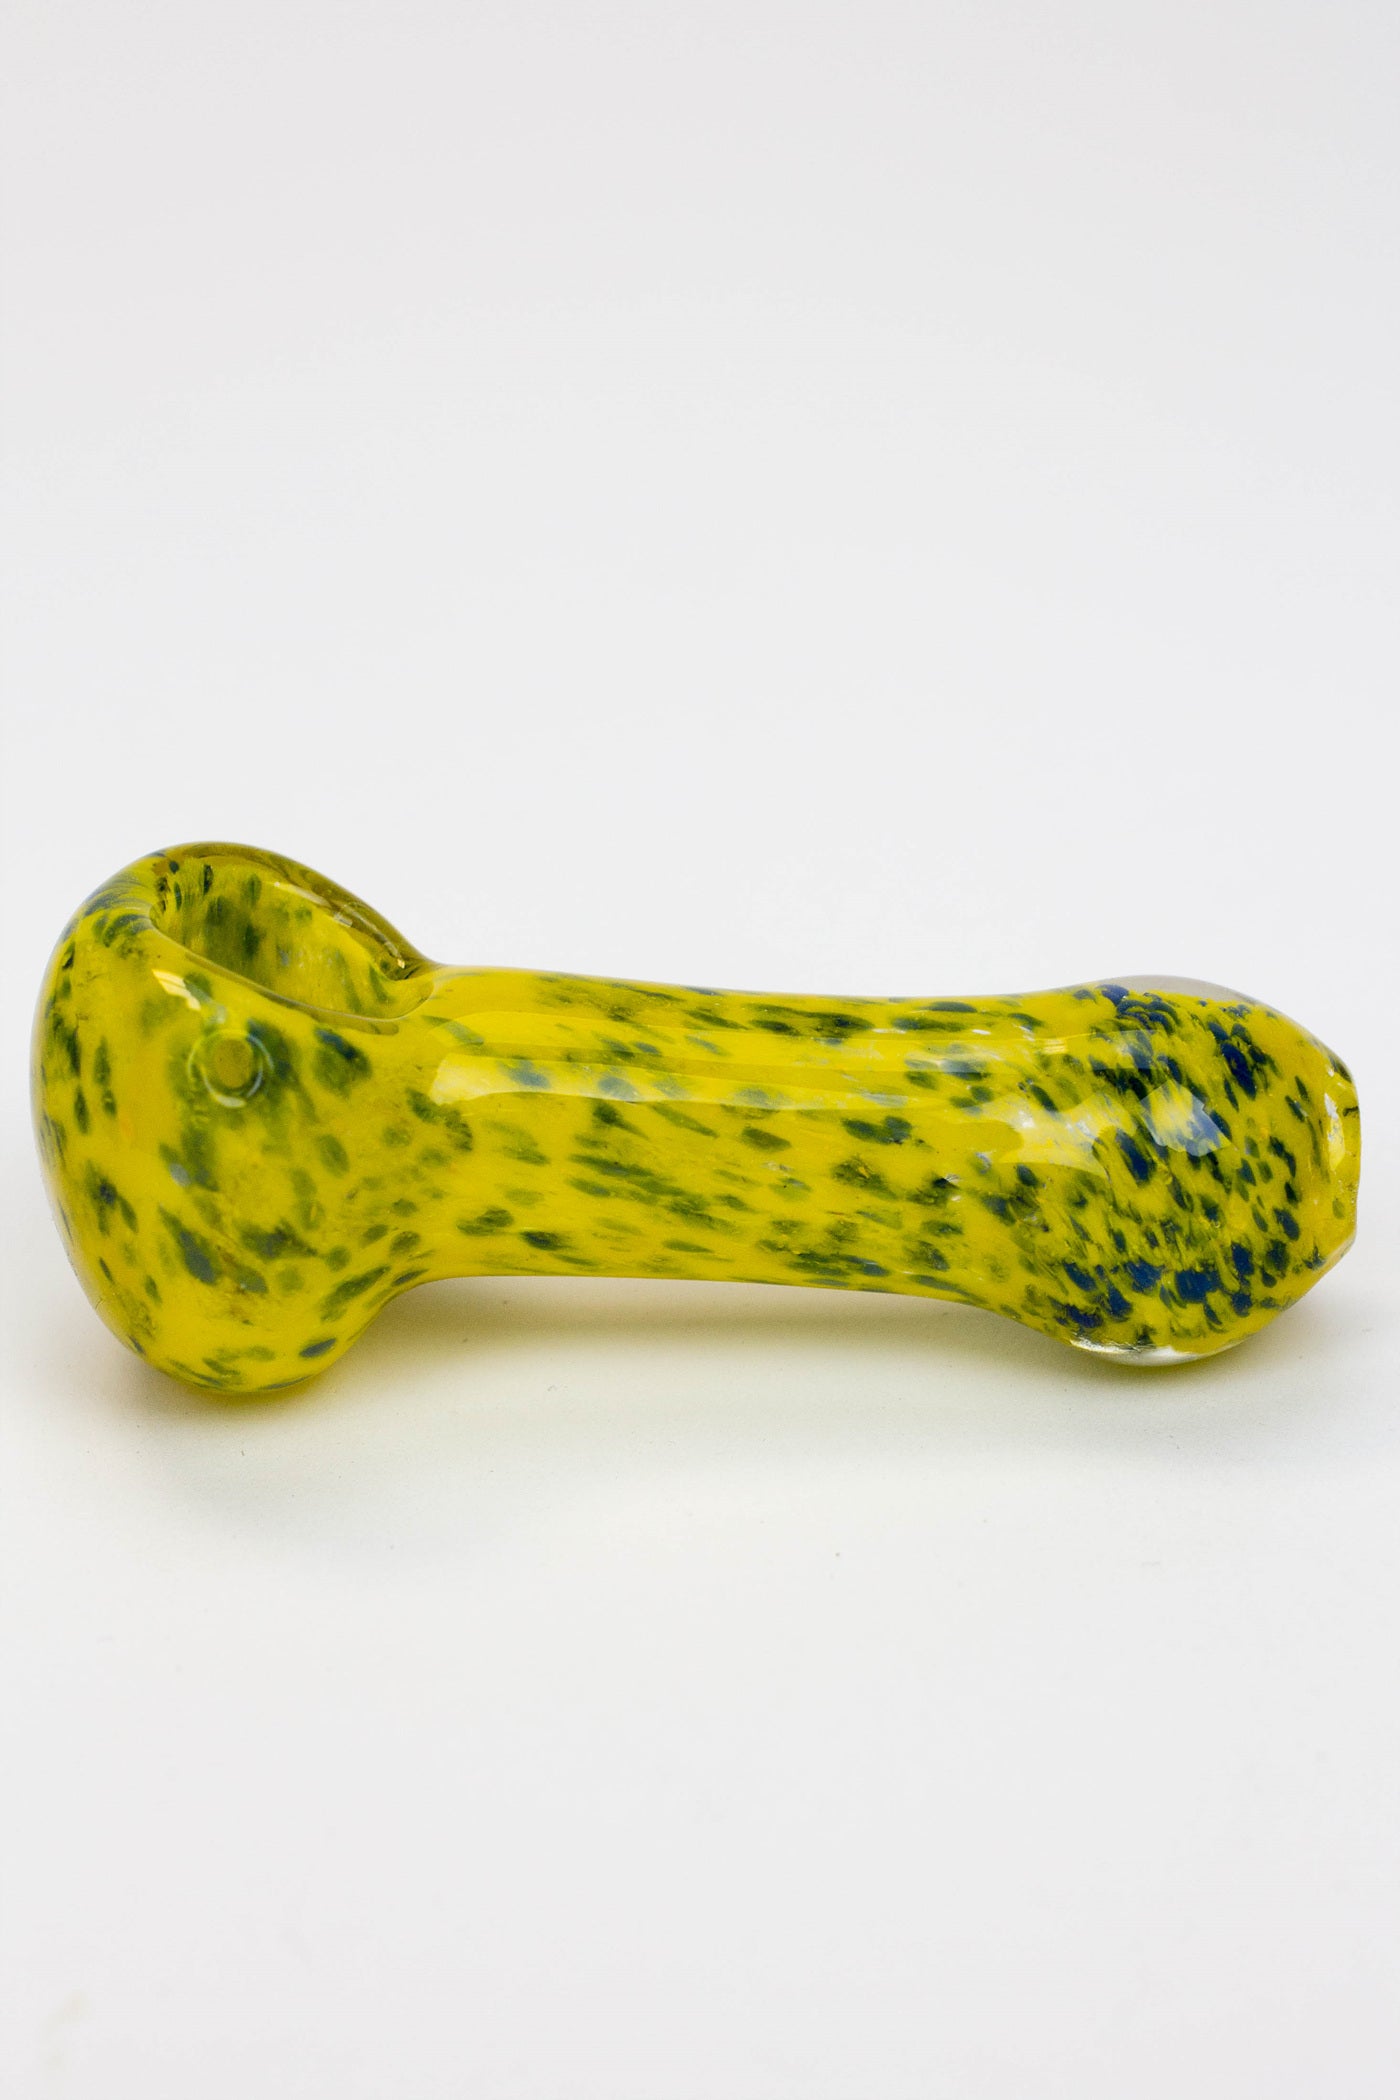 3" Soft glass 8551 hand pipe_3